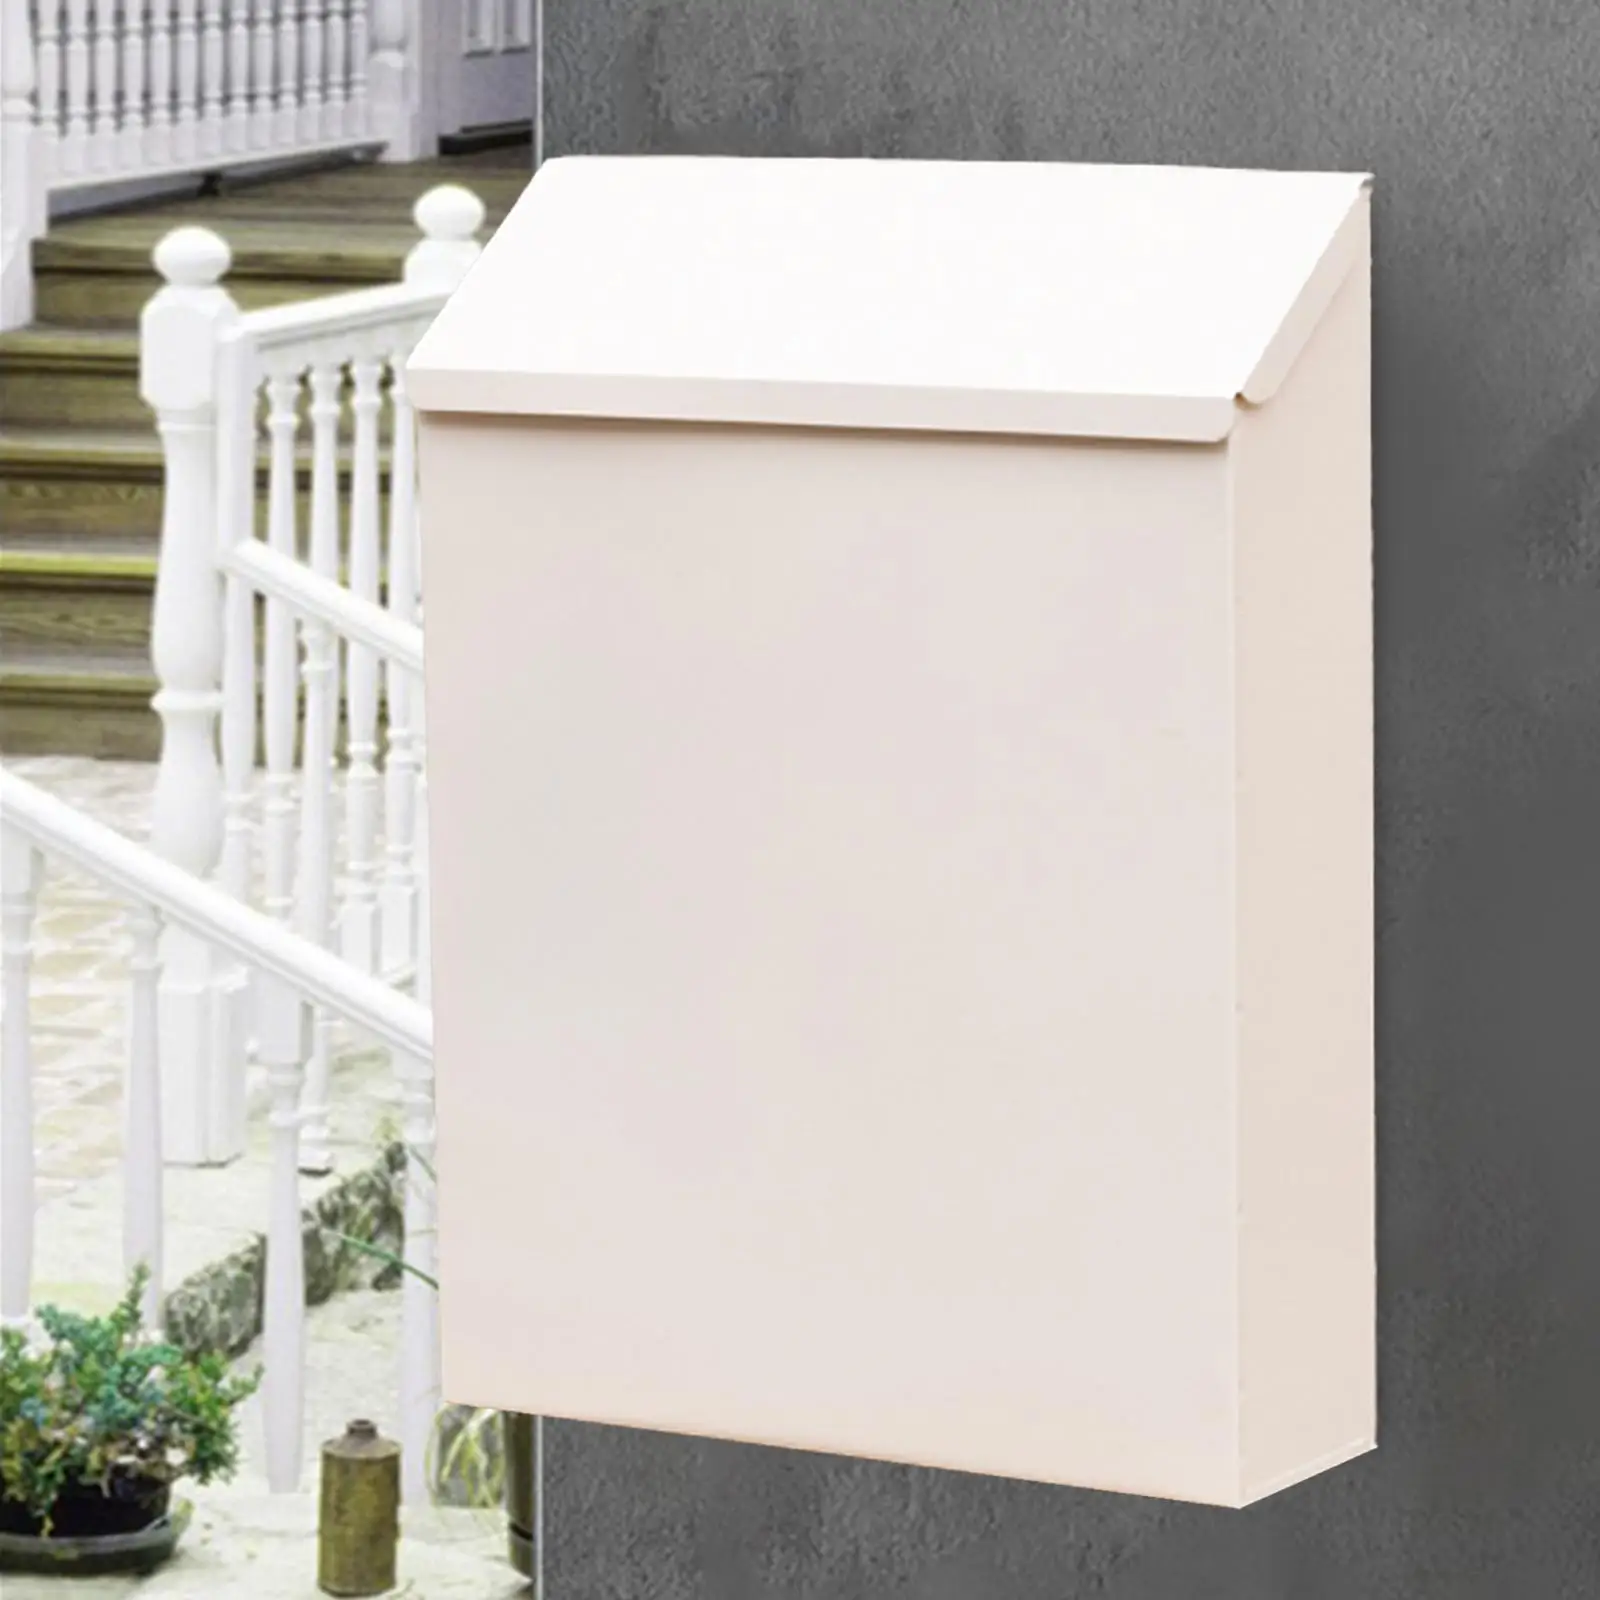 Drop Box with Lock Letter Box with Key Wall Mounted Mailbox Newspaper Holder Box for Front Door Home Office Outdoor Porch Gate